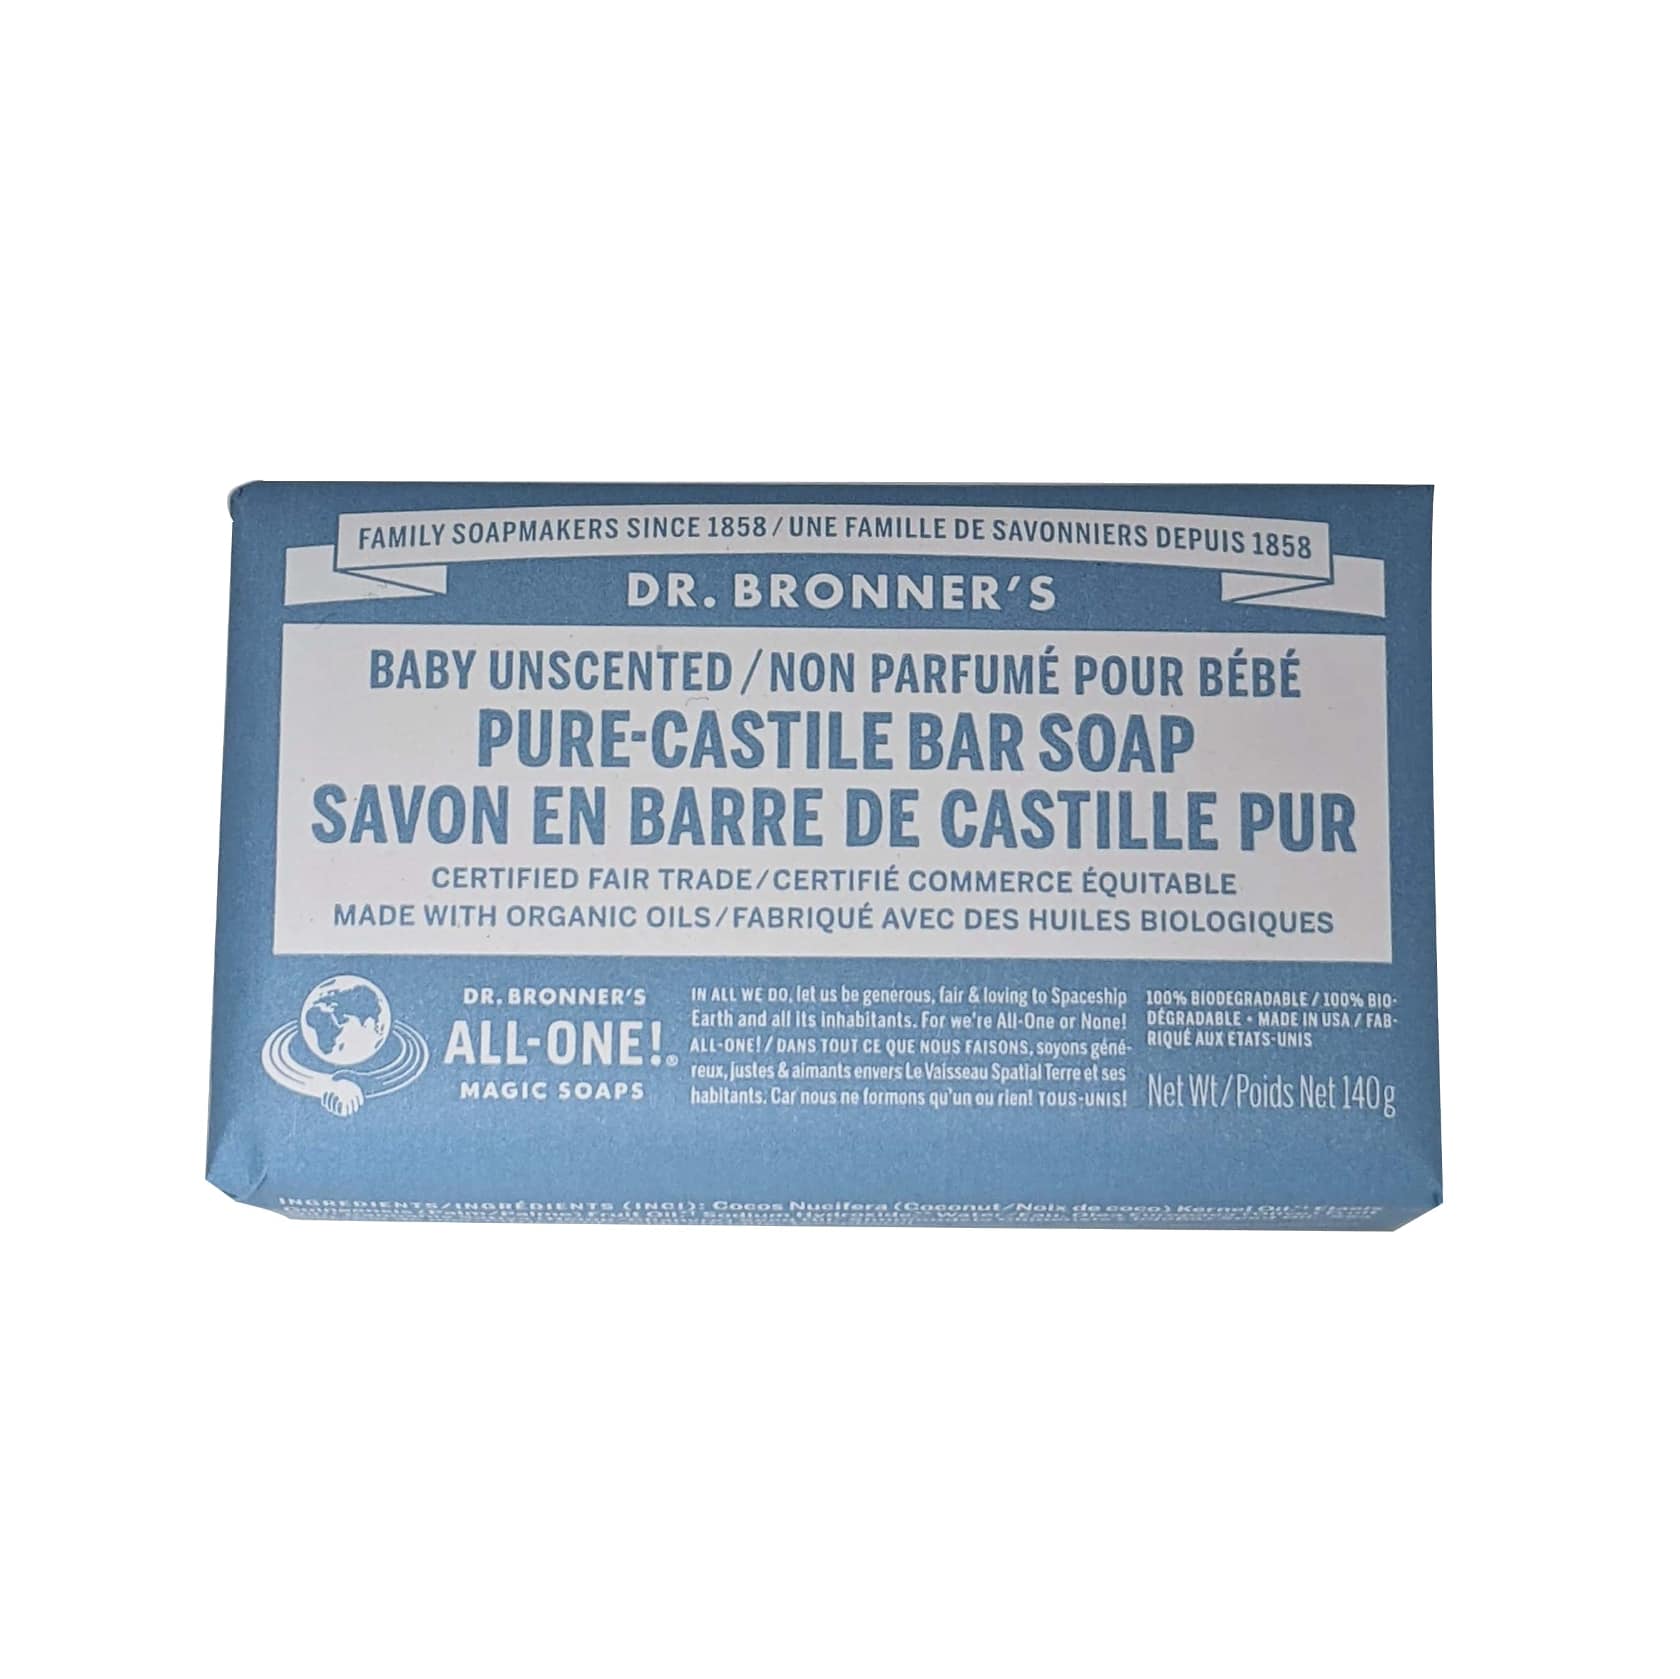 Product label for Dr. Bronner's Baby Unscented Pure Castile Bar Soap